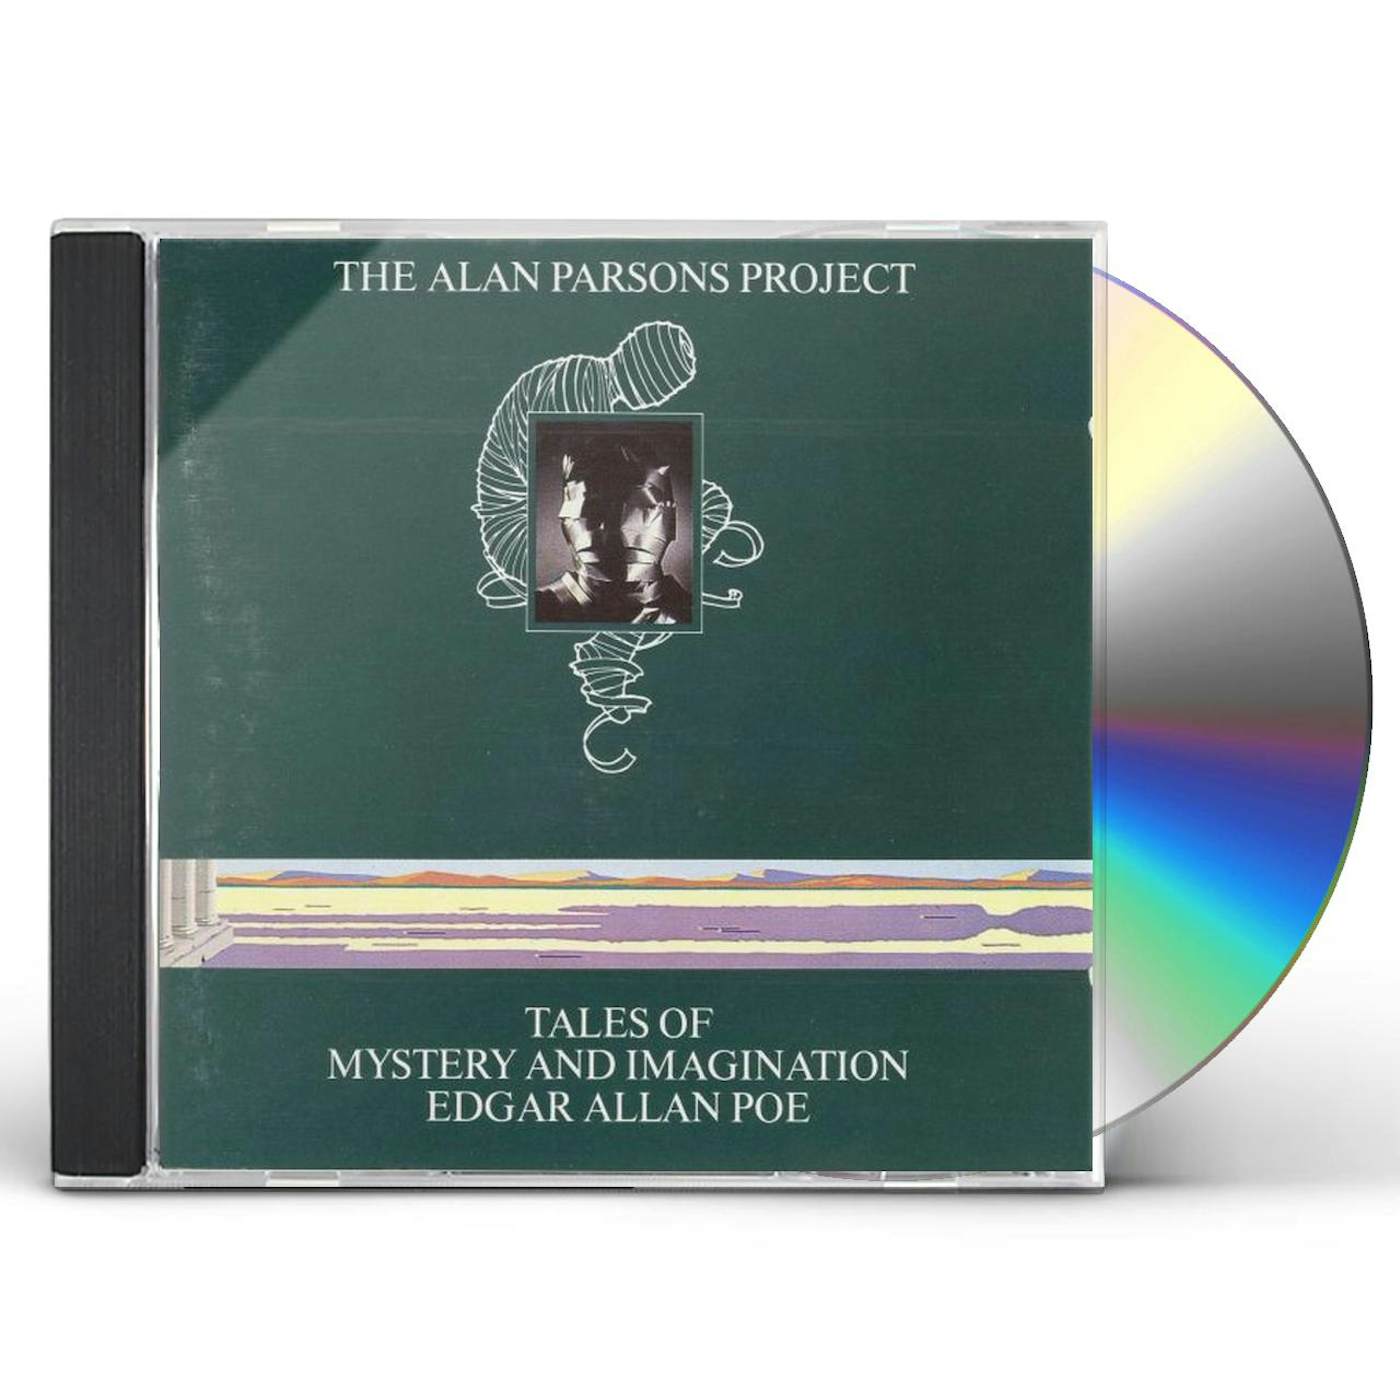 The Alan Parsons Project TALES OF MYSTERY & IMAGINATION CD